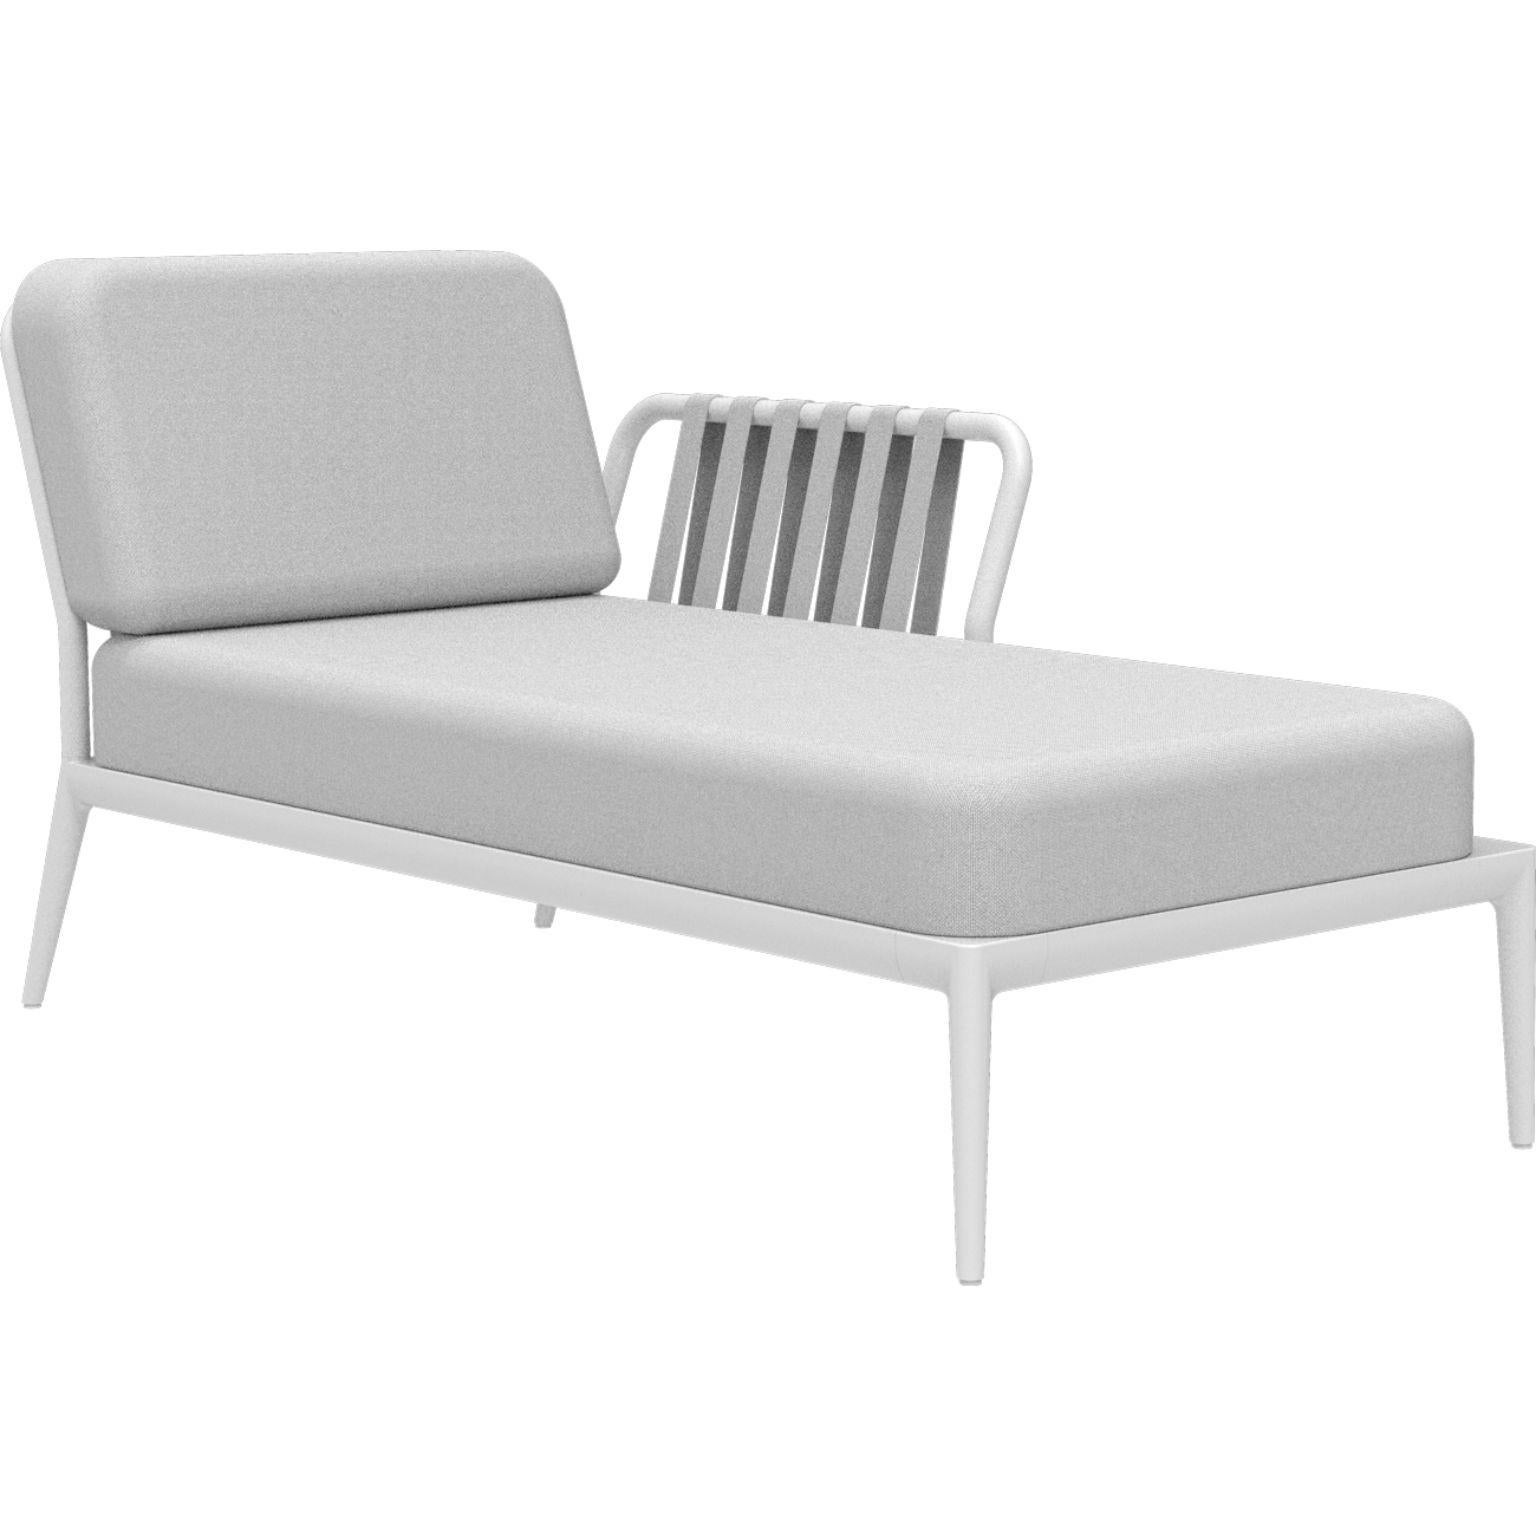 Ribbons white left chaise longue by MOWEE
Dimensions: D80 x W155 x H81 cm
Material: Aluminum, Upholstery
Weight: 28 kg
Also Available in different colours and finishes.

An unmistakable collection for its beauty and robustness. A tribute to